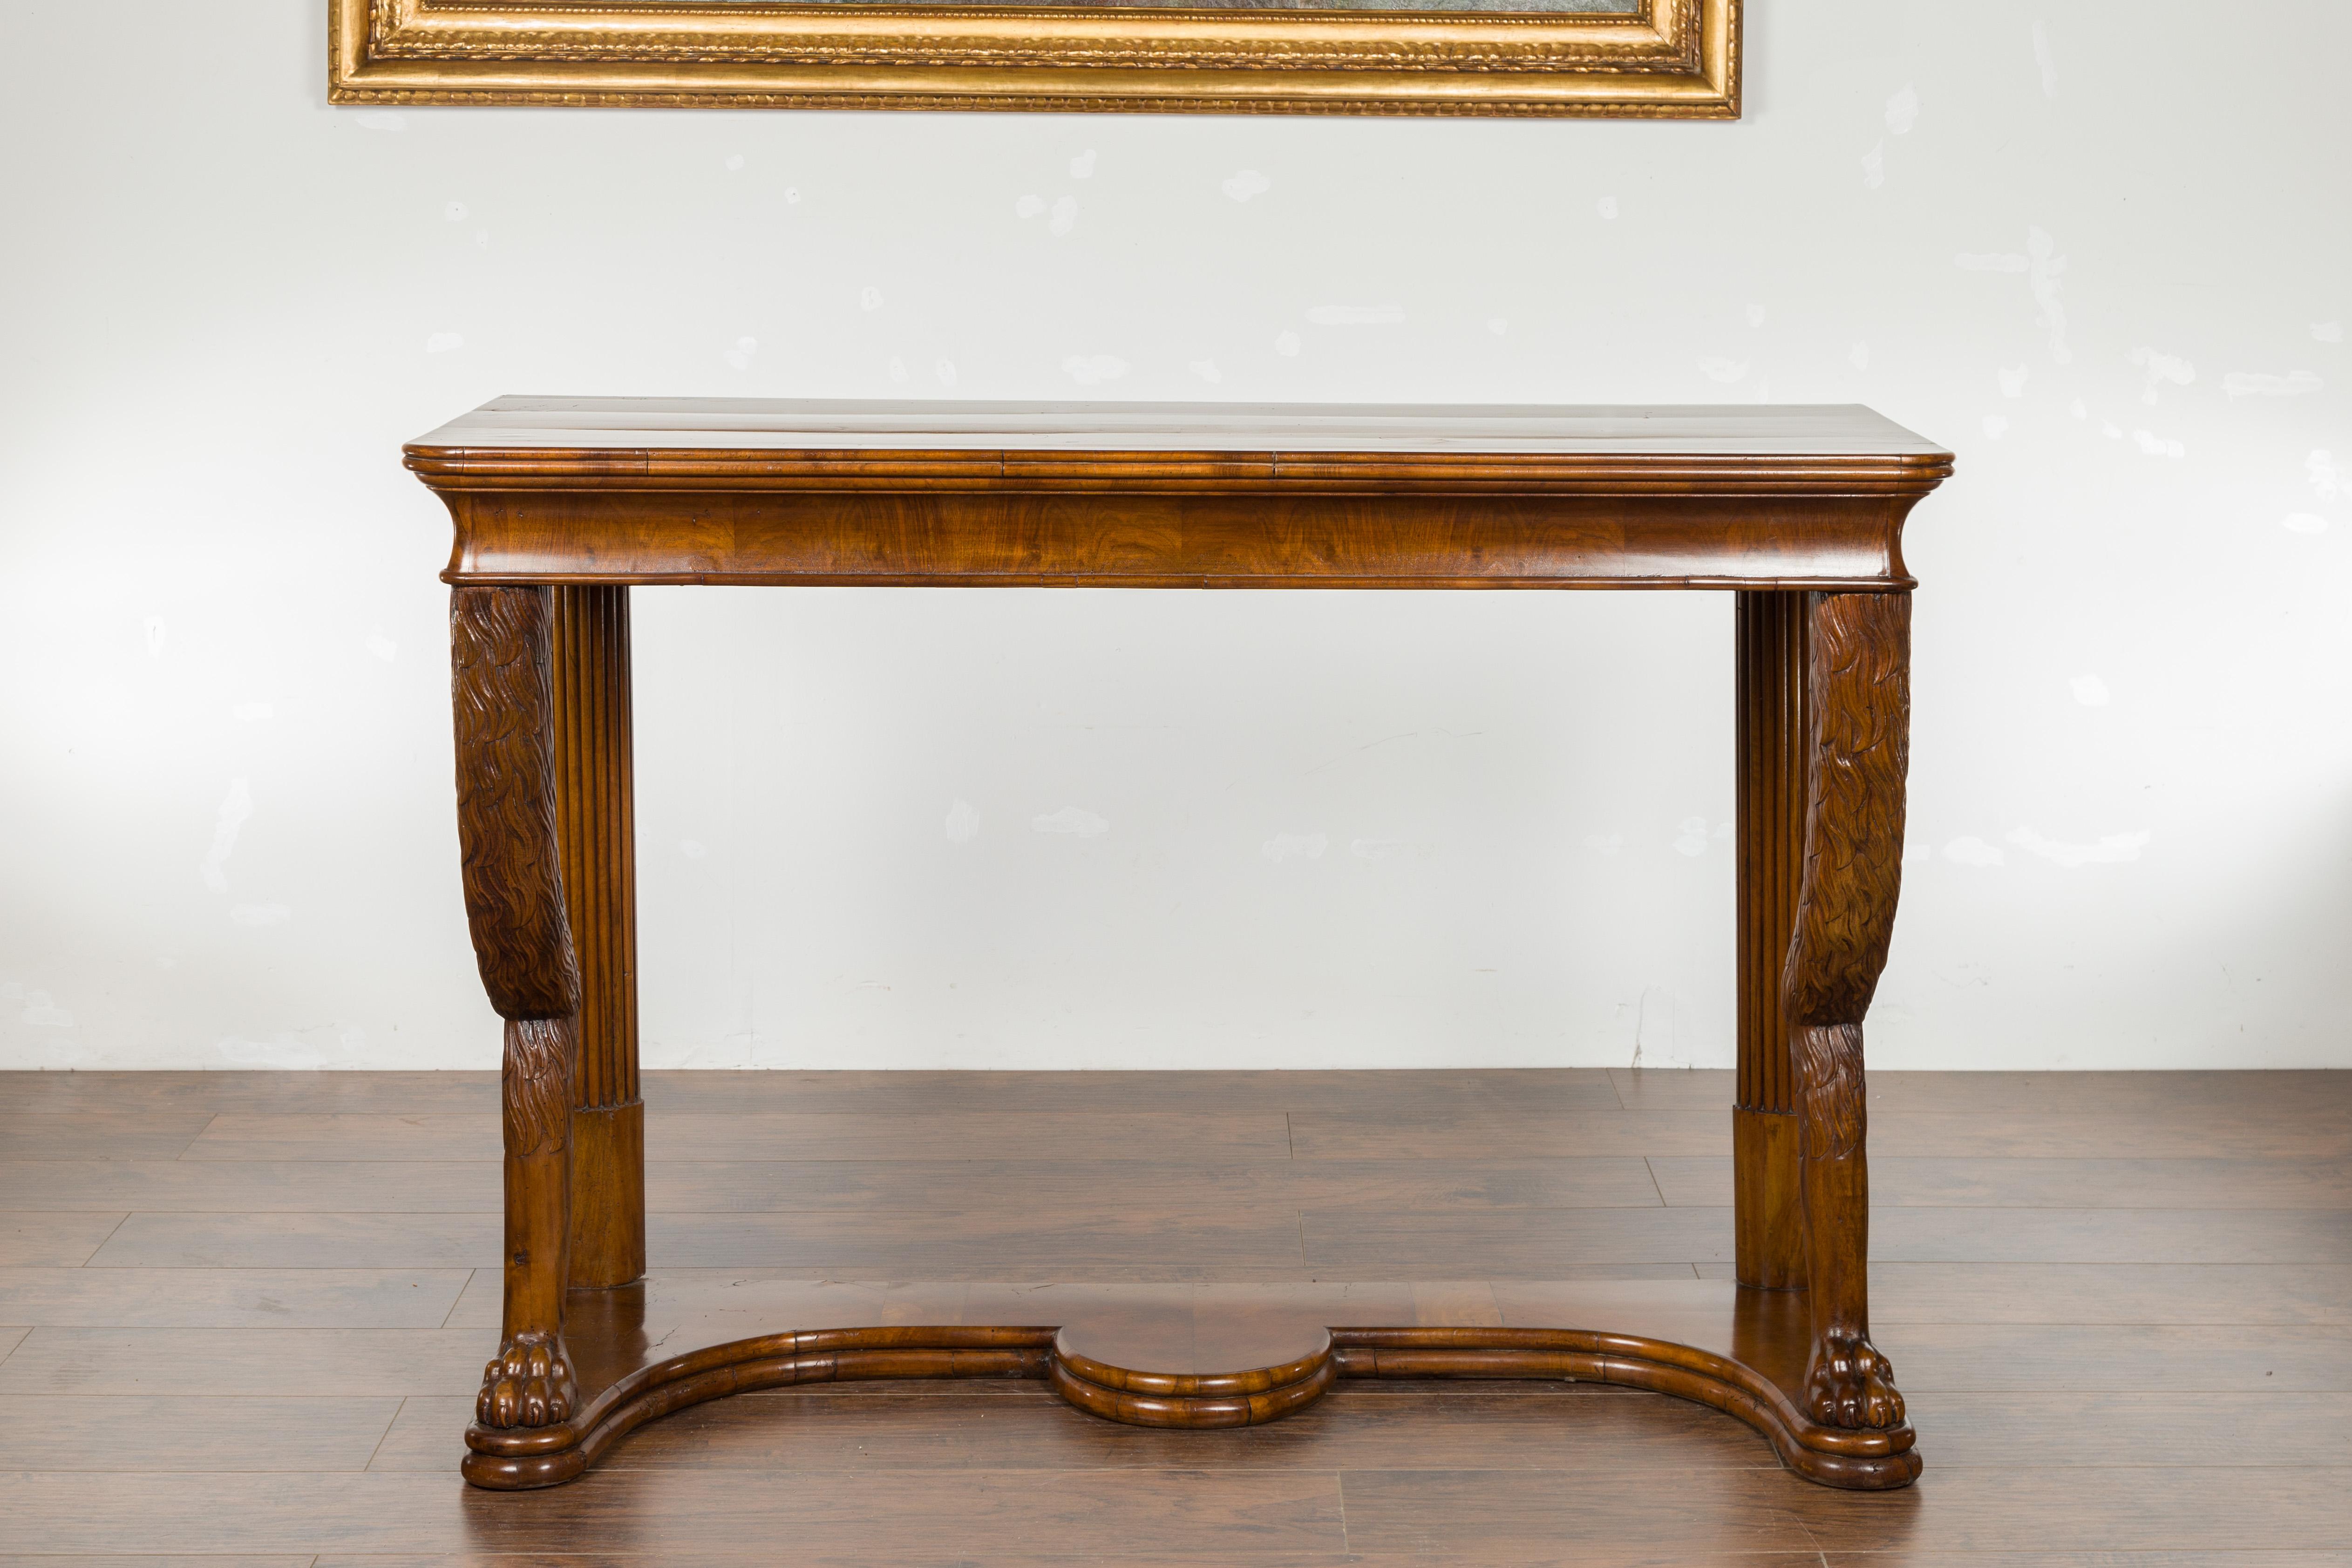 An Austrian Biedermeier period walnut console table from the mid-19th century, with fur style legs and lion paw feet. Created in Austria during the second quarter of the 19th century, this Biedermeier console table features a rectangular top with